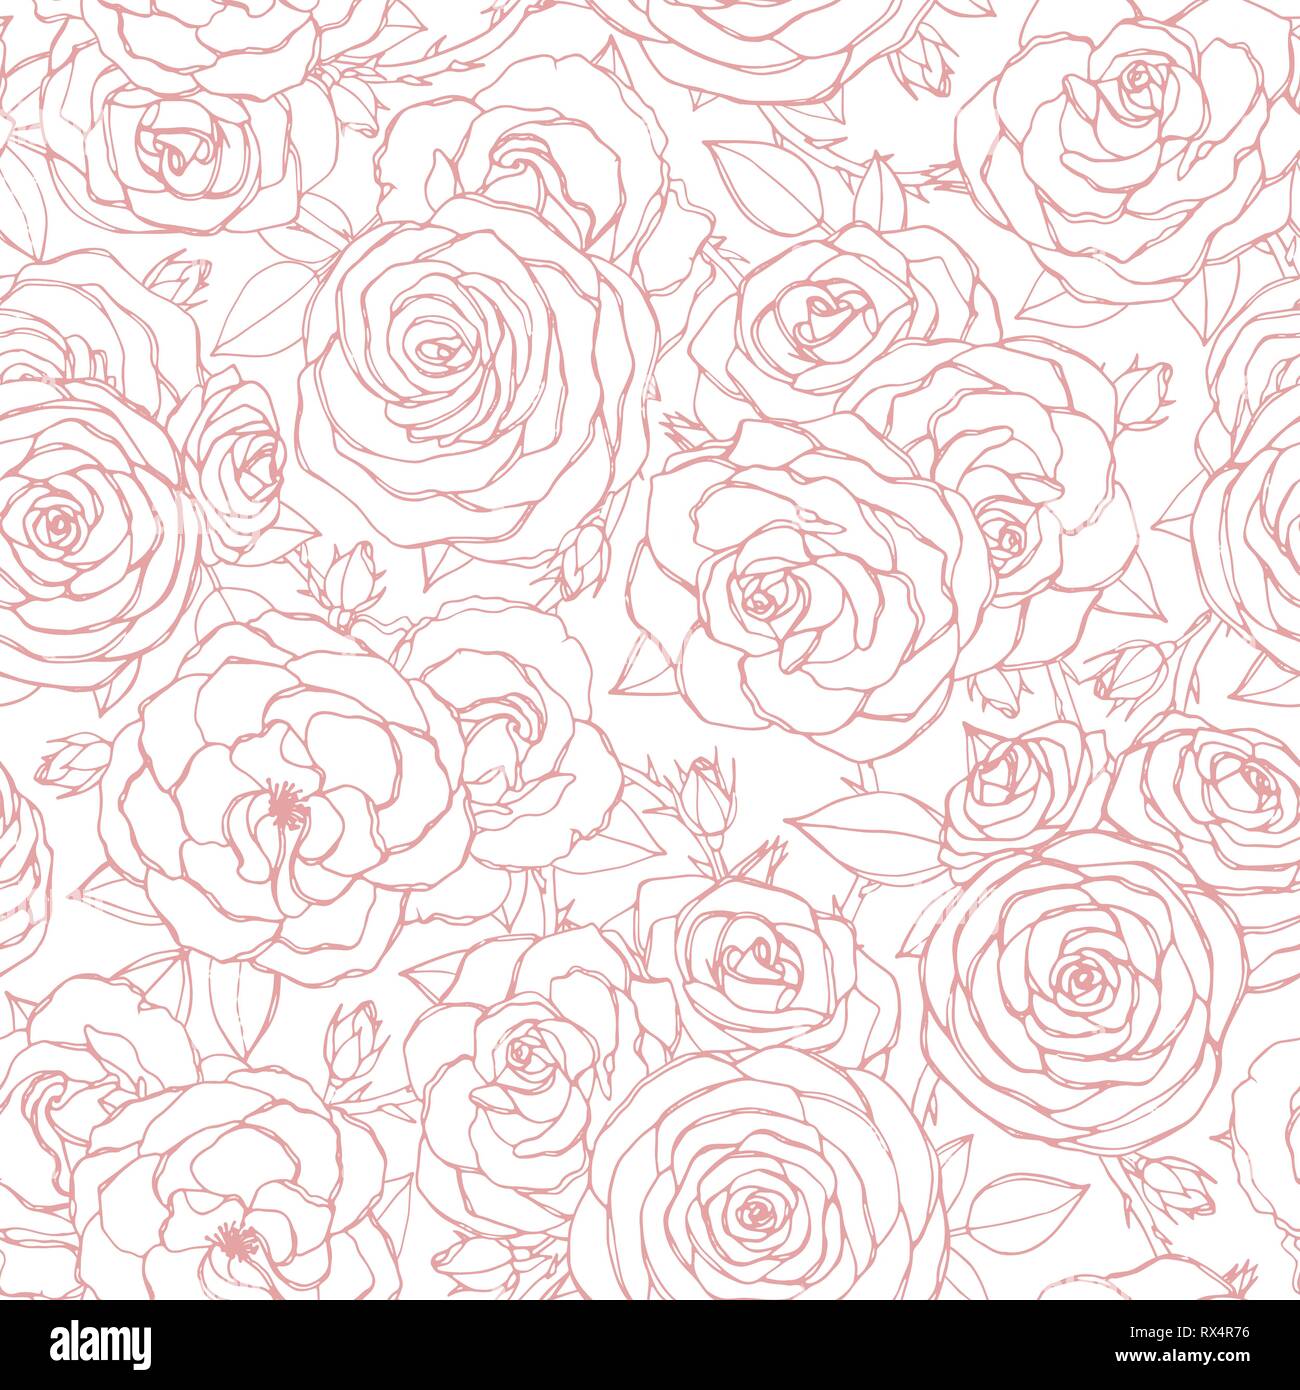 Rose background vector Stock Vector Images - Alamy